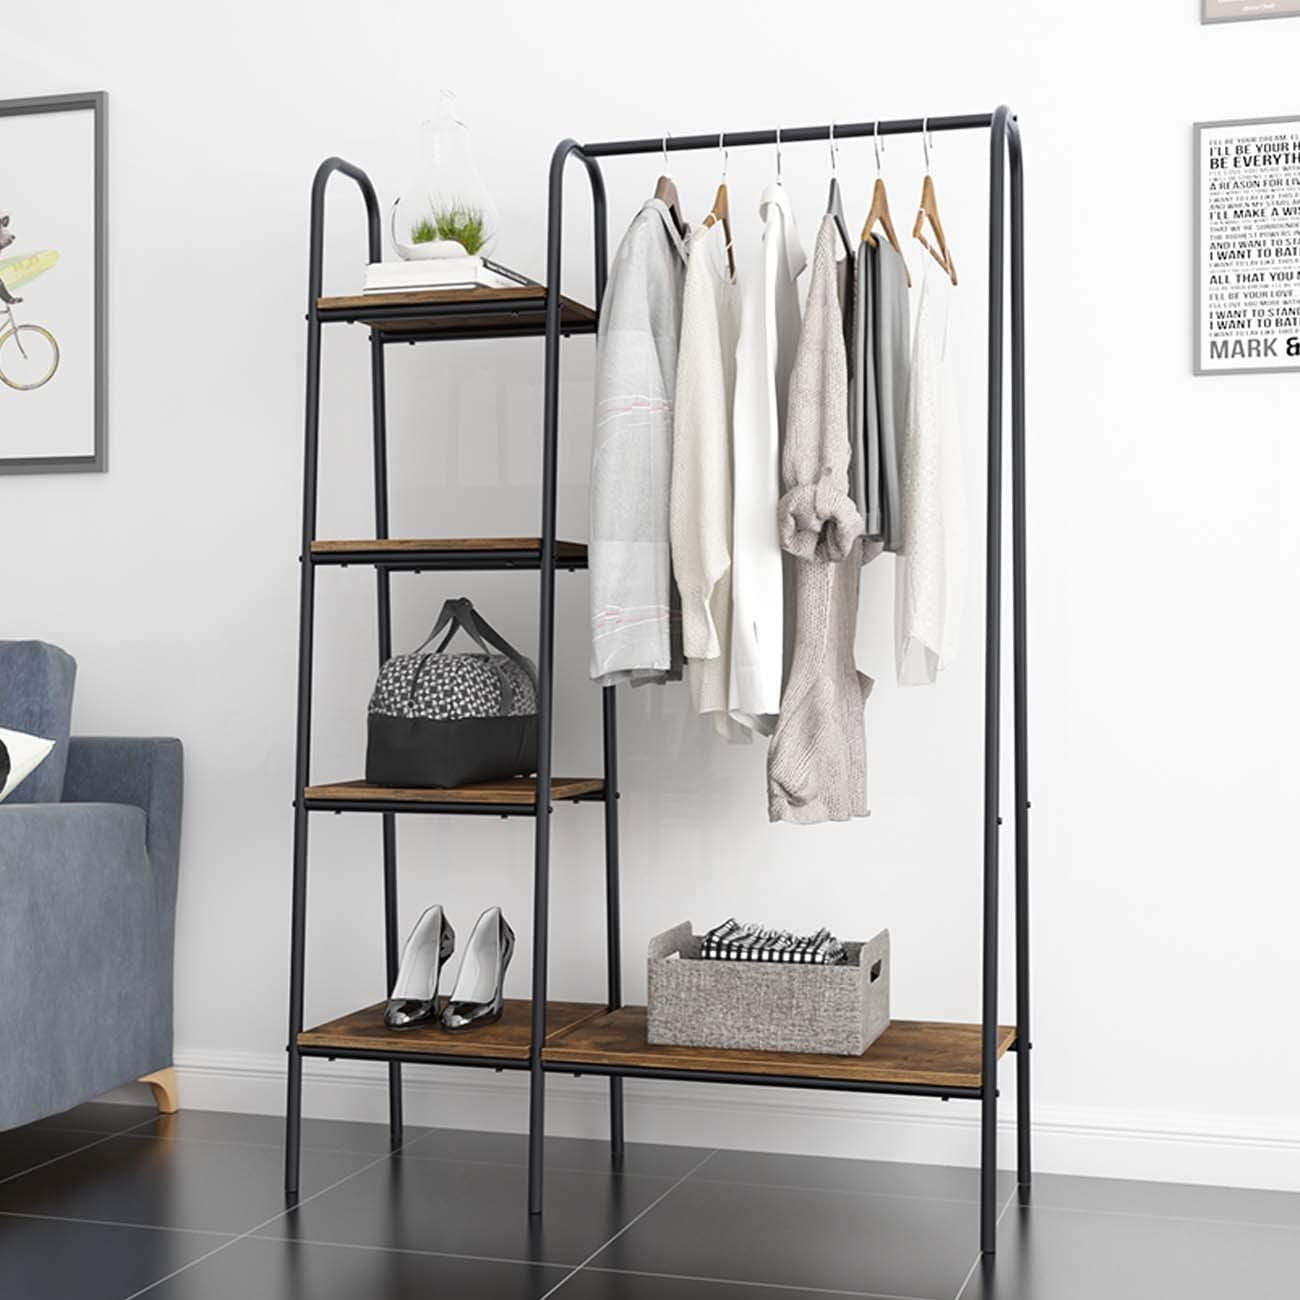 Heavy Duty Metal Garment Rack With Wood, Clothing Shelves For Closet